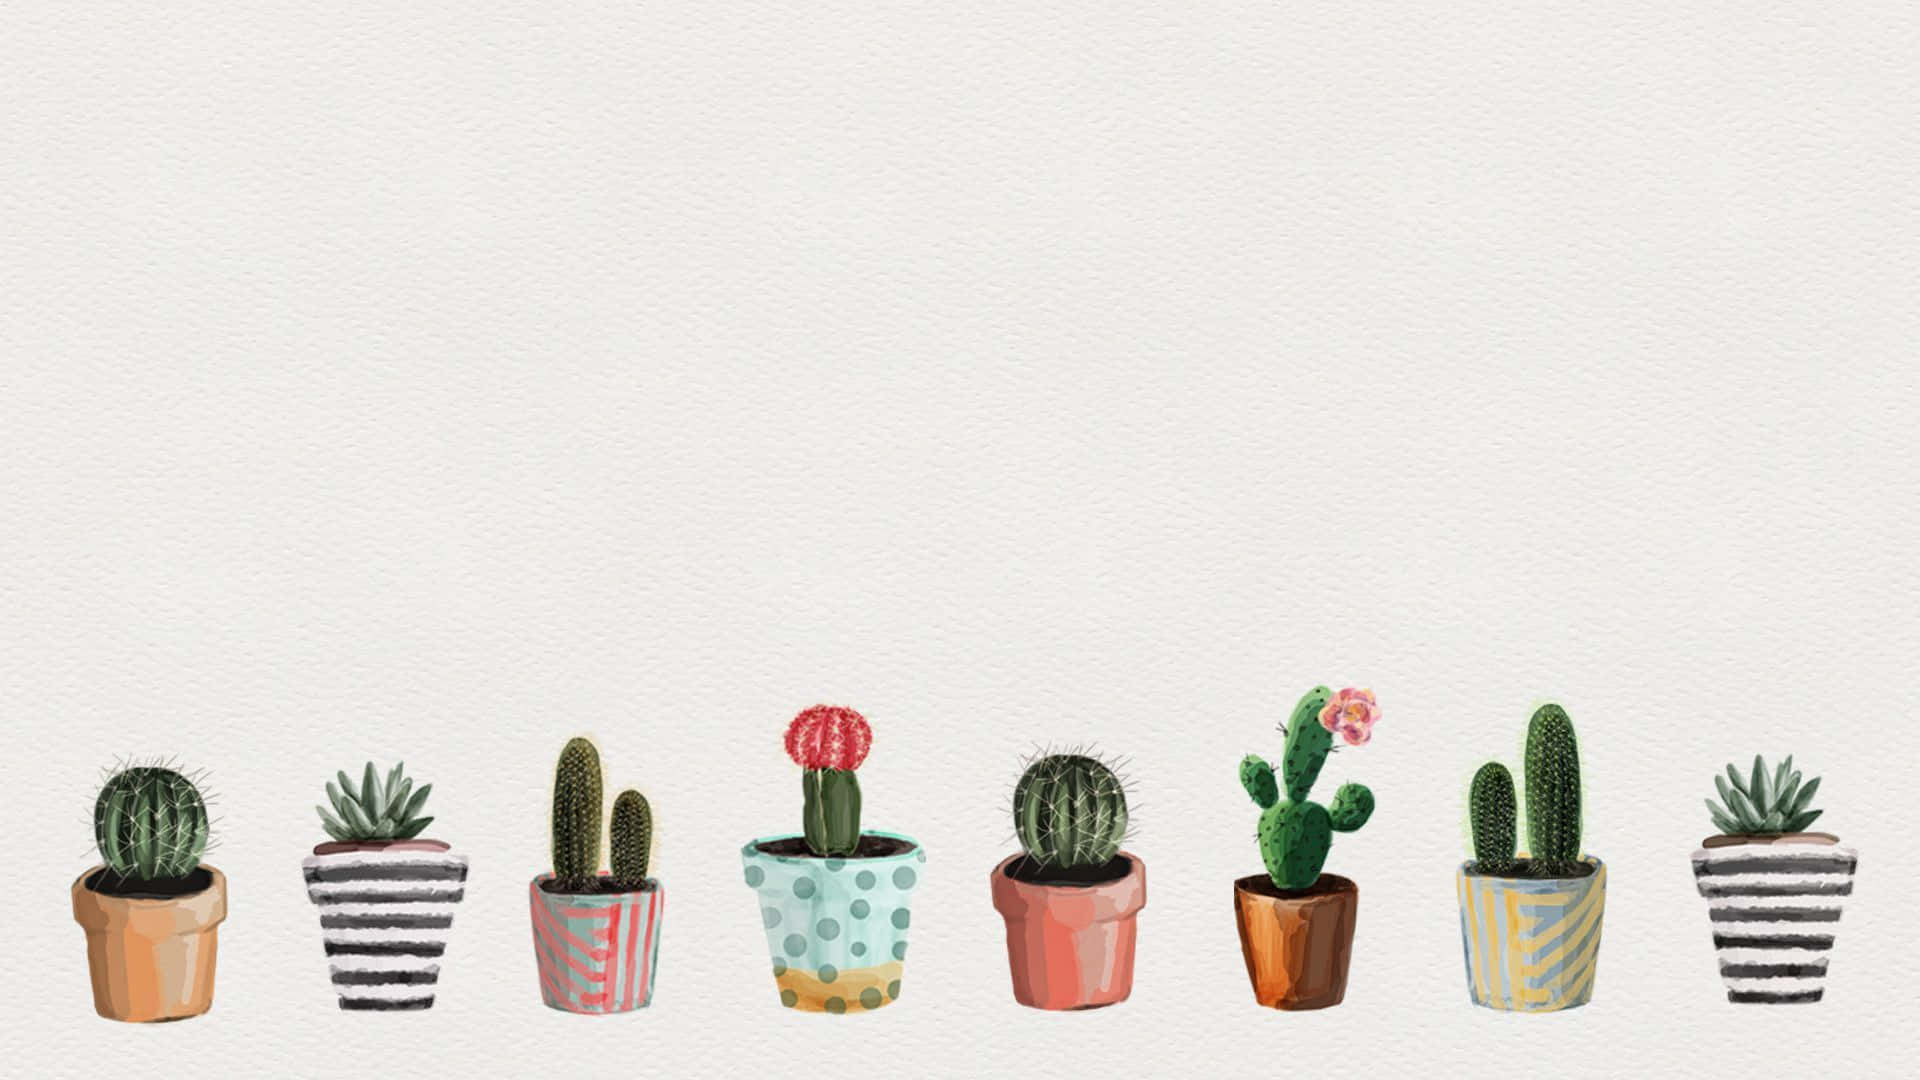 A Watercolor Illustration Of Cactus Plants In Pots Background